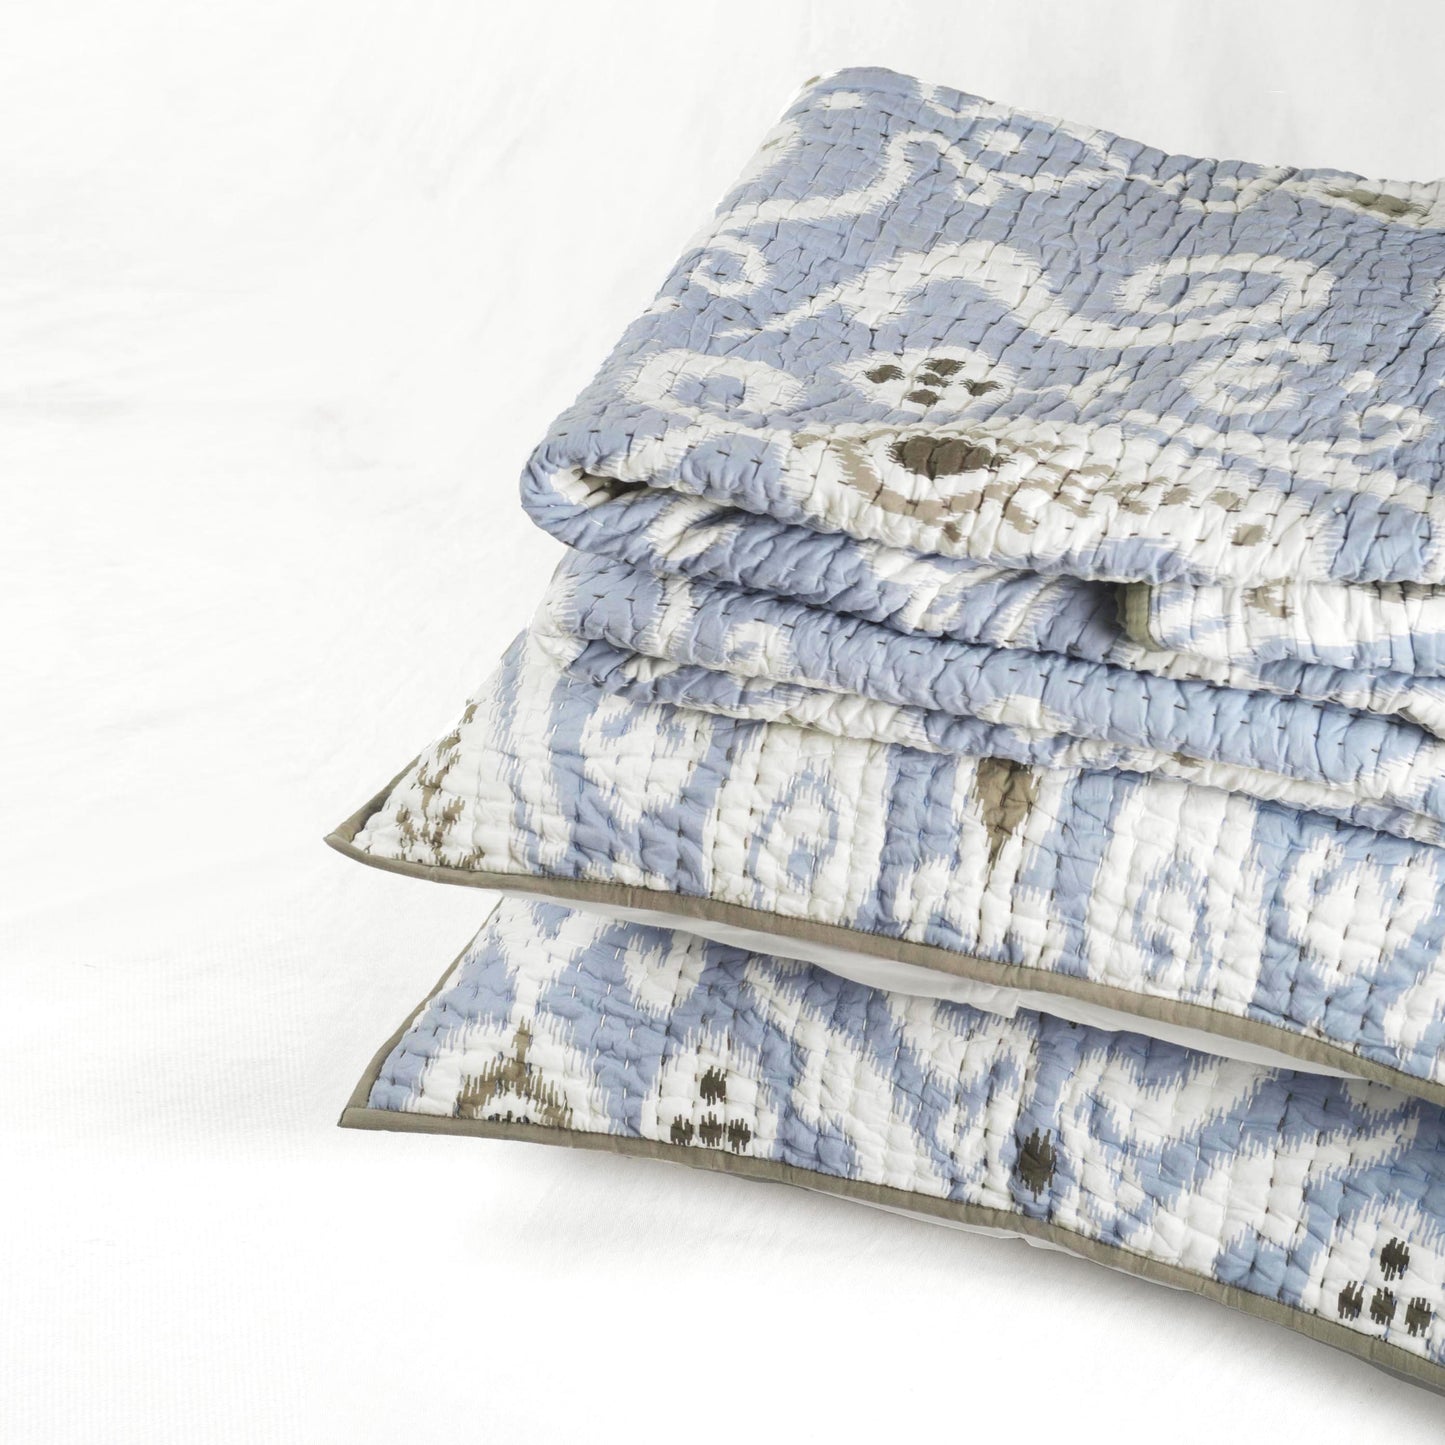 PILLOW SHAM KANTHA - Blue ikat print with stripe pattern quilting, sizes available